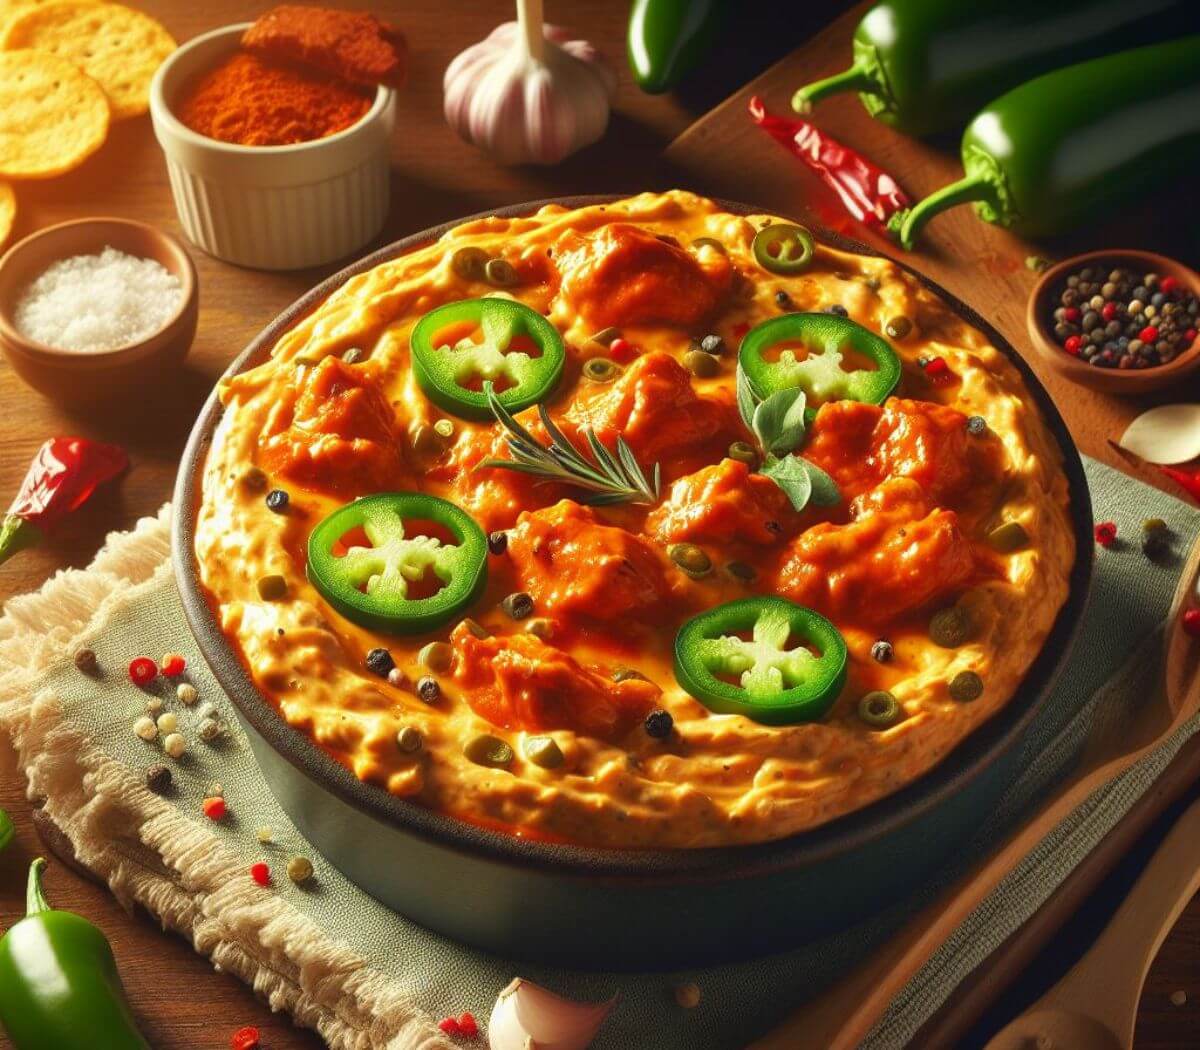 the Spicy Jalapeno Buffalo Chicken Dip